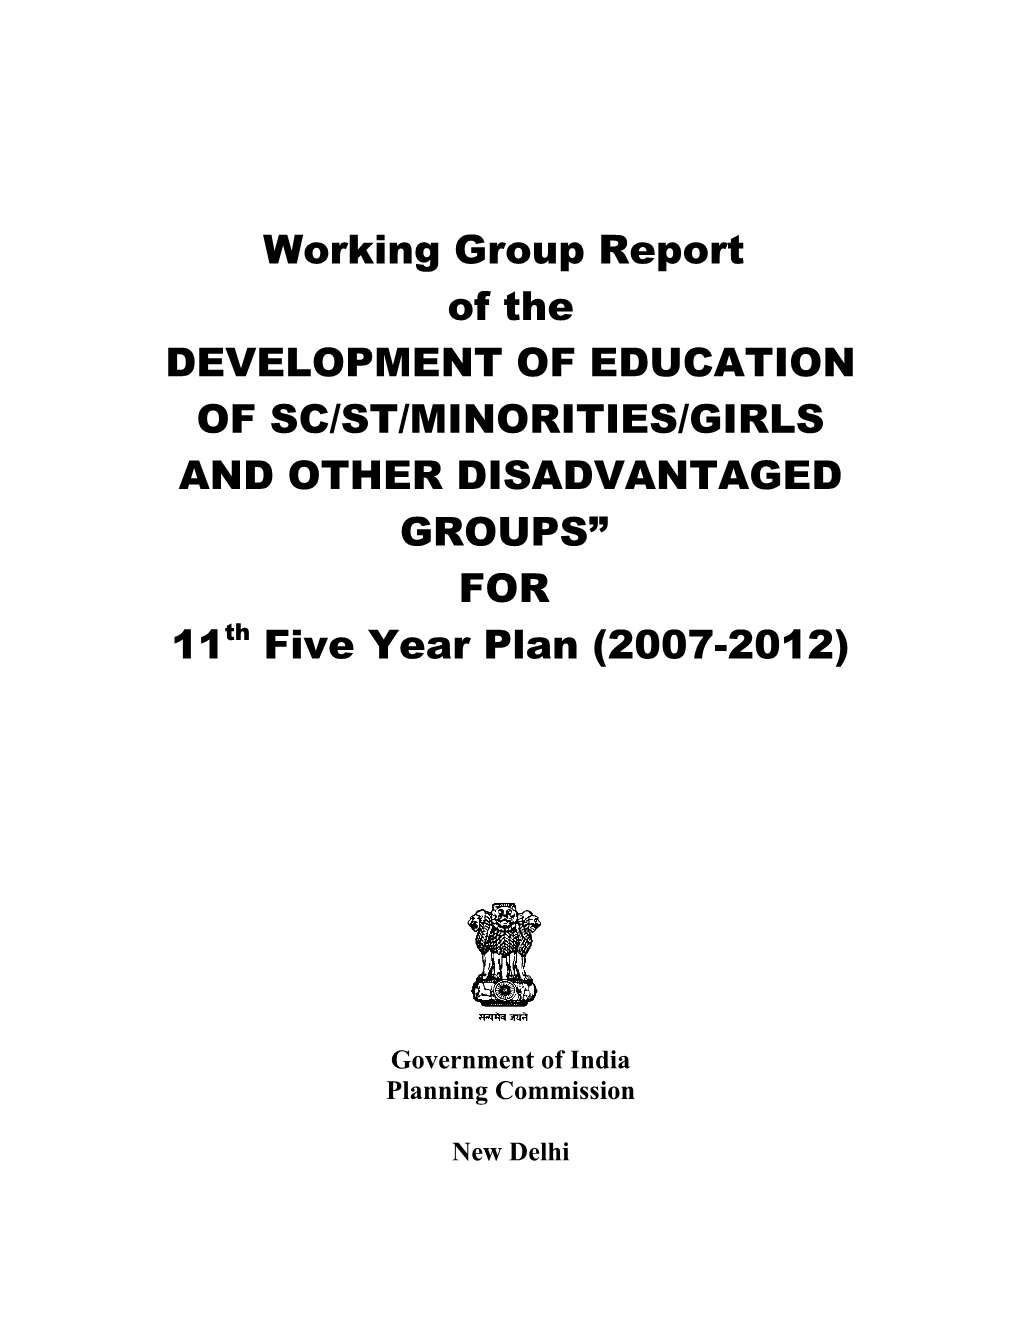 Development of Education of Sc/St/Minorities/Girls and Other Disadvantaged Groups